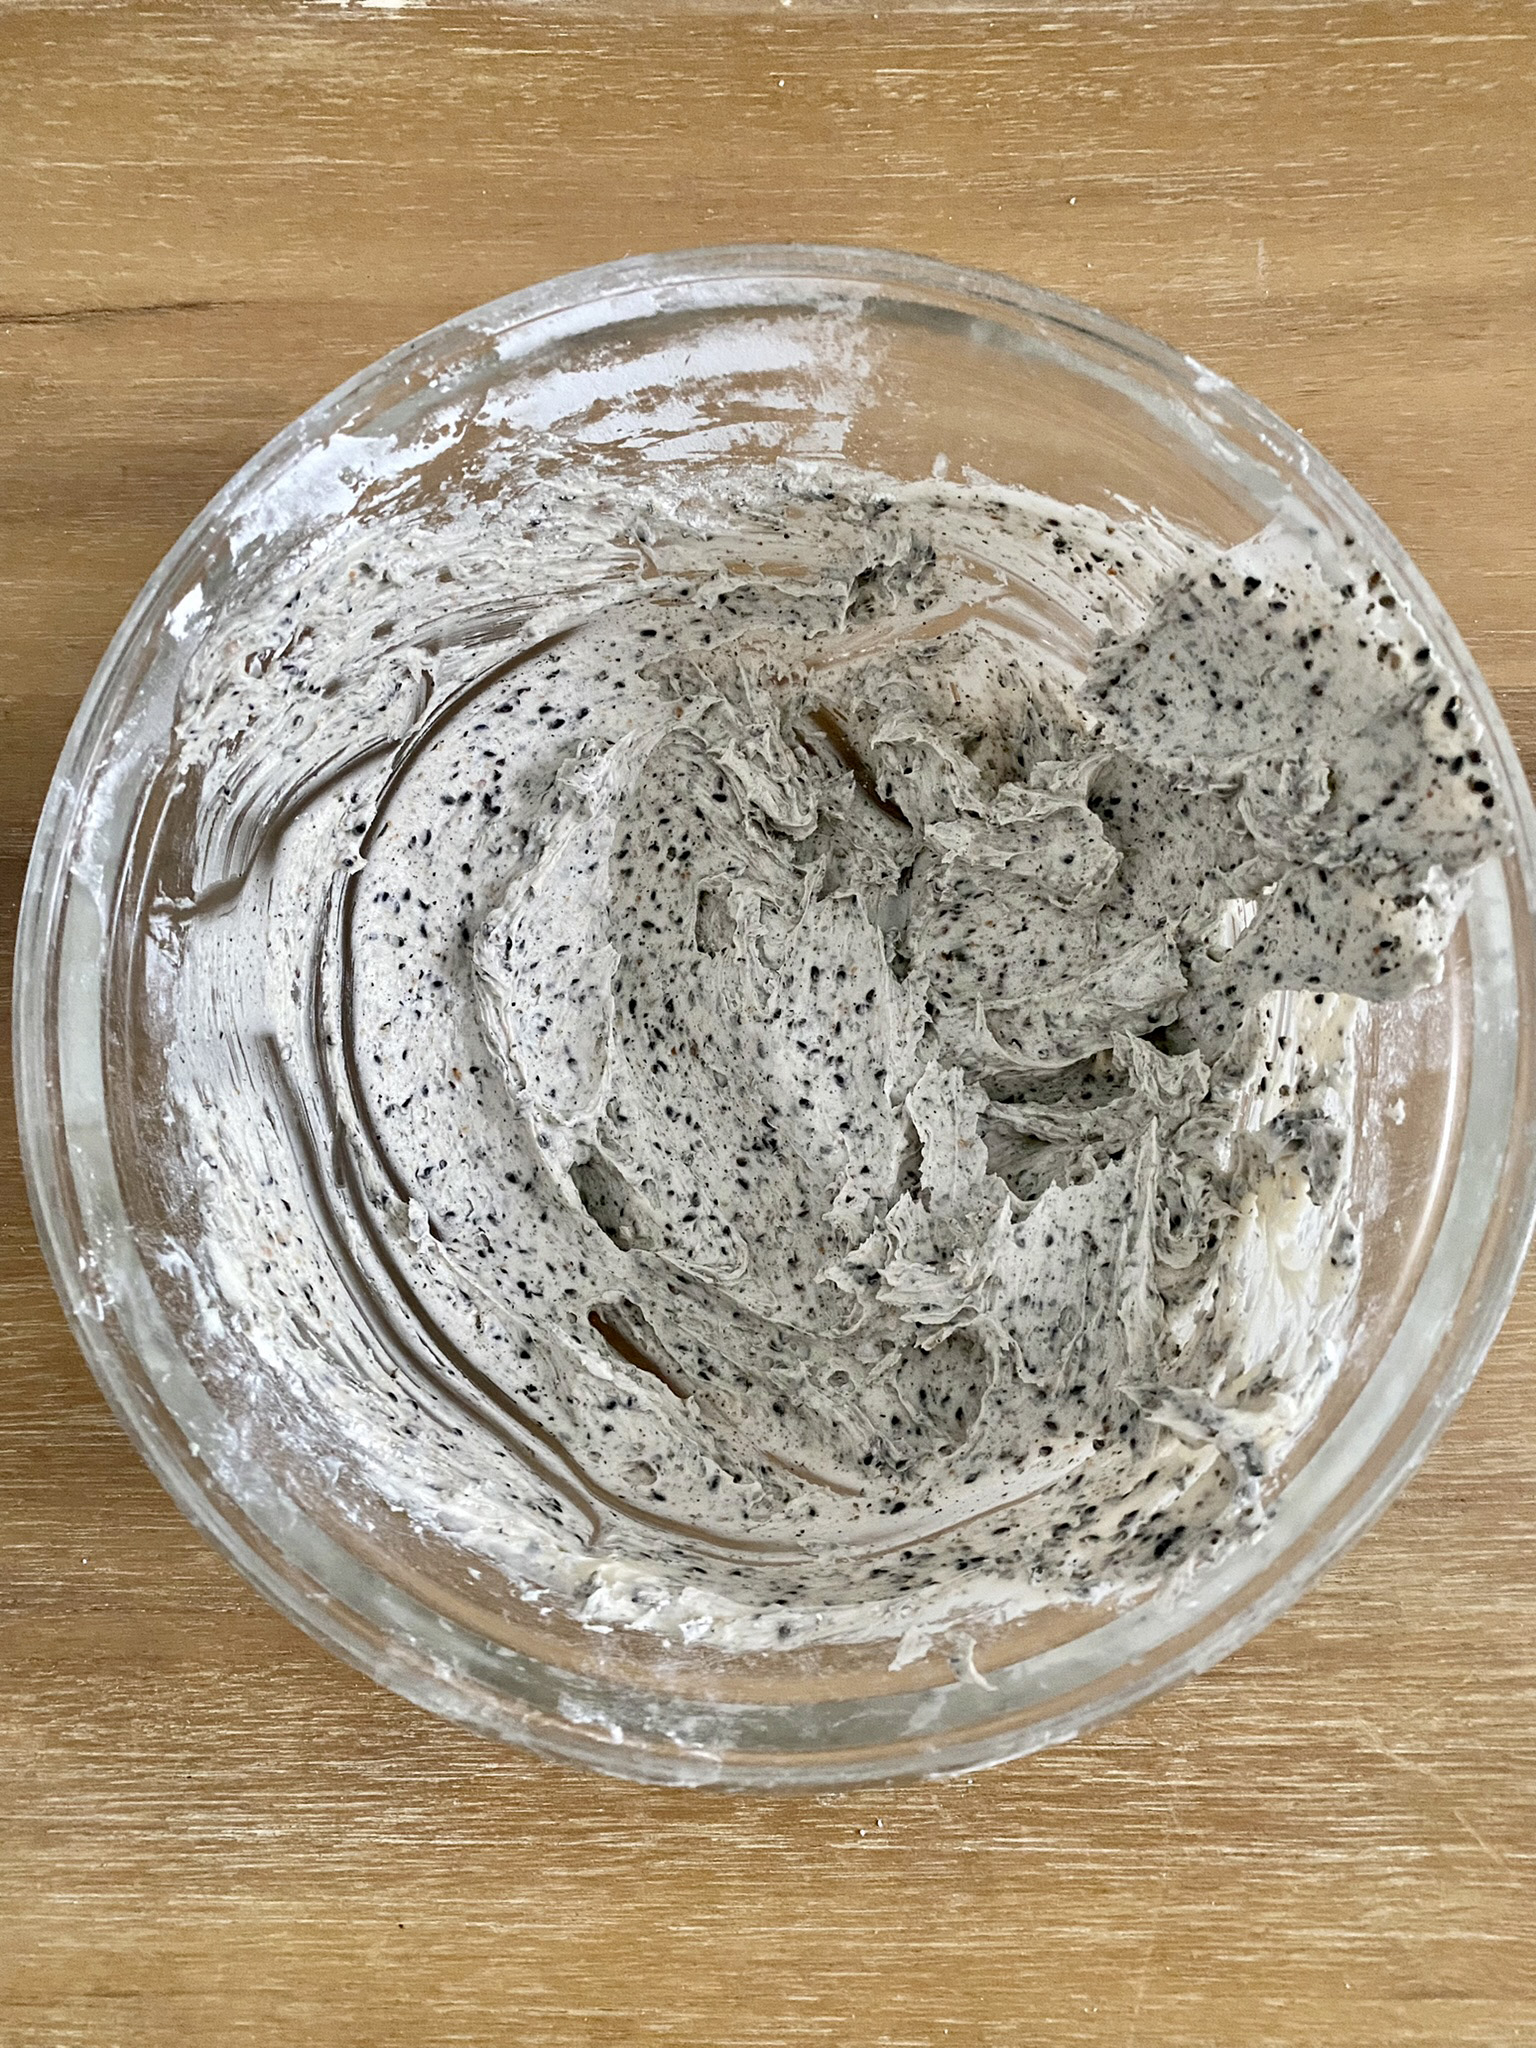 black sesame frosting in mixing bowl